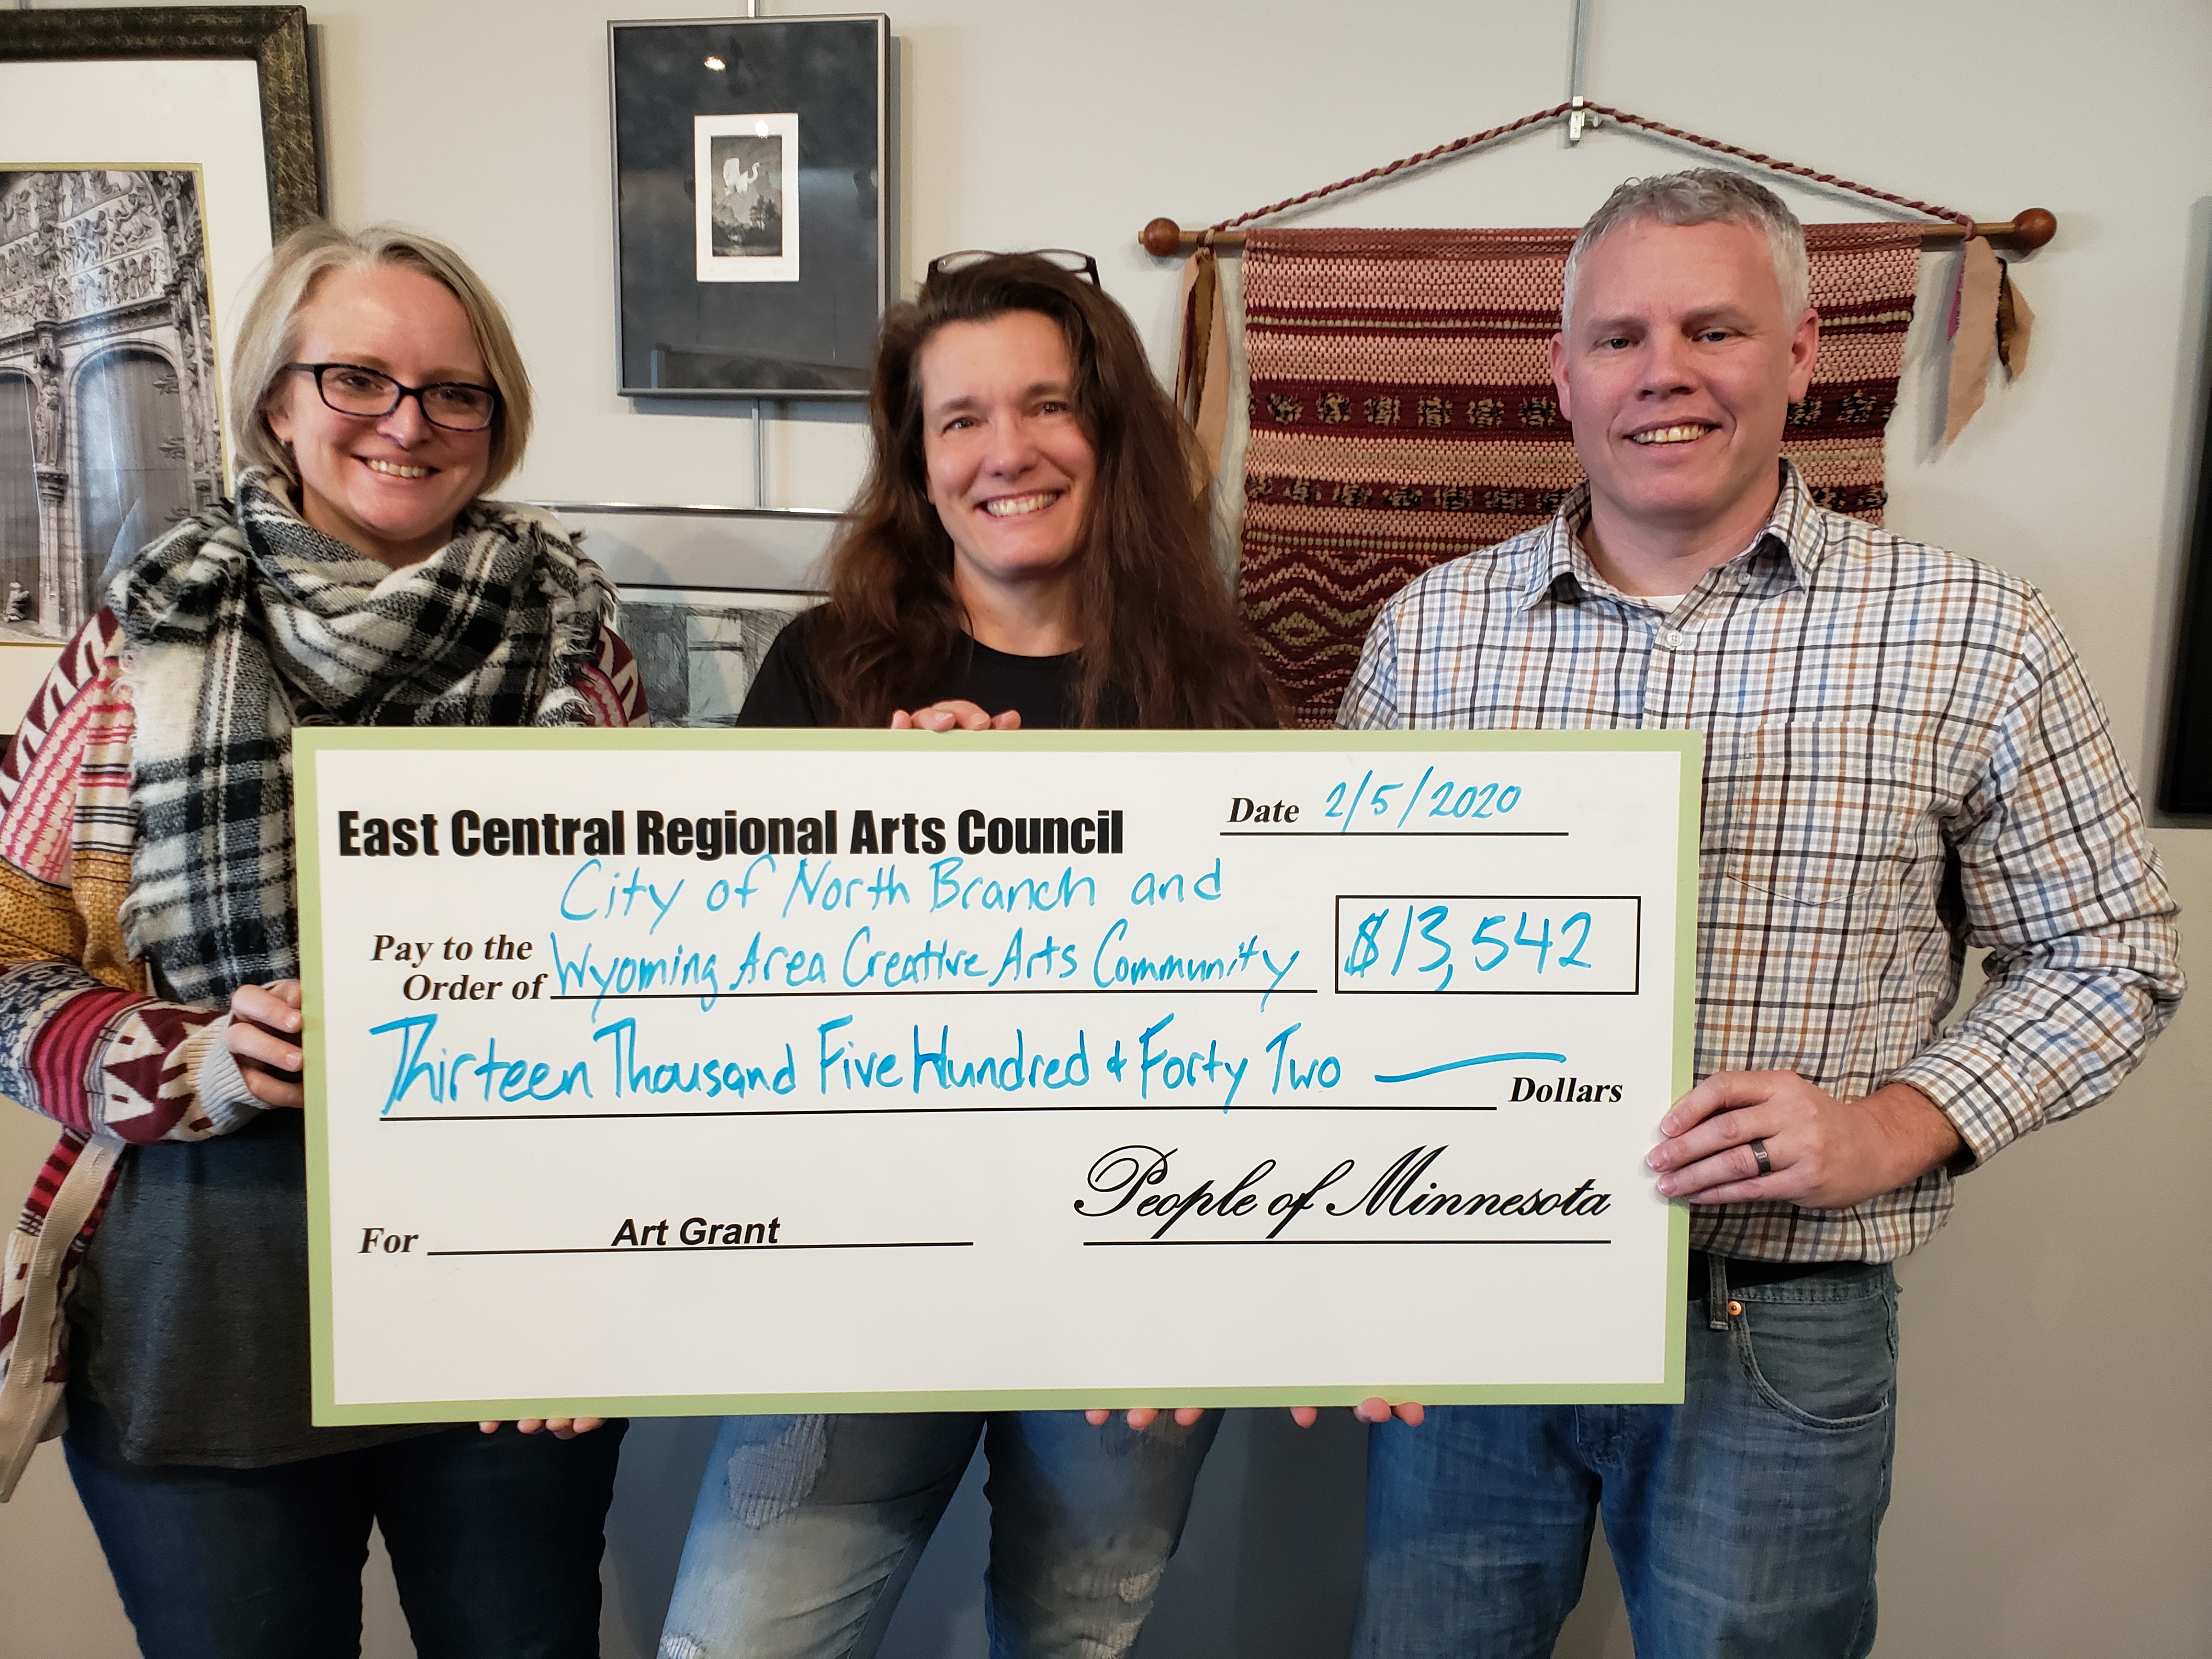 Tree Croyle and Jess Eischens of the Wyoming Area Creative Arts Community and Nate Sondrol of the City of North Branch accept funding for art projects.